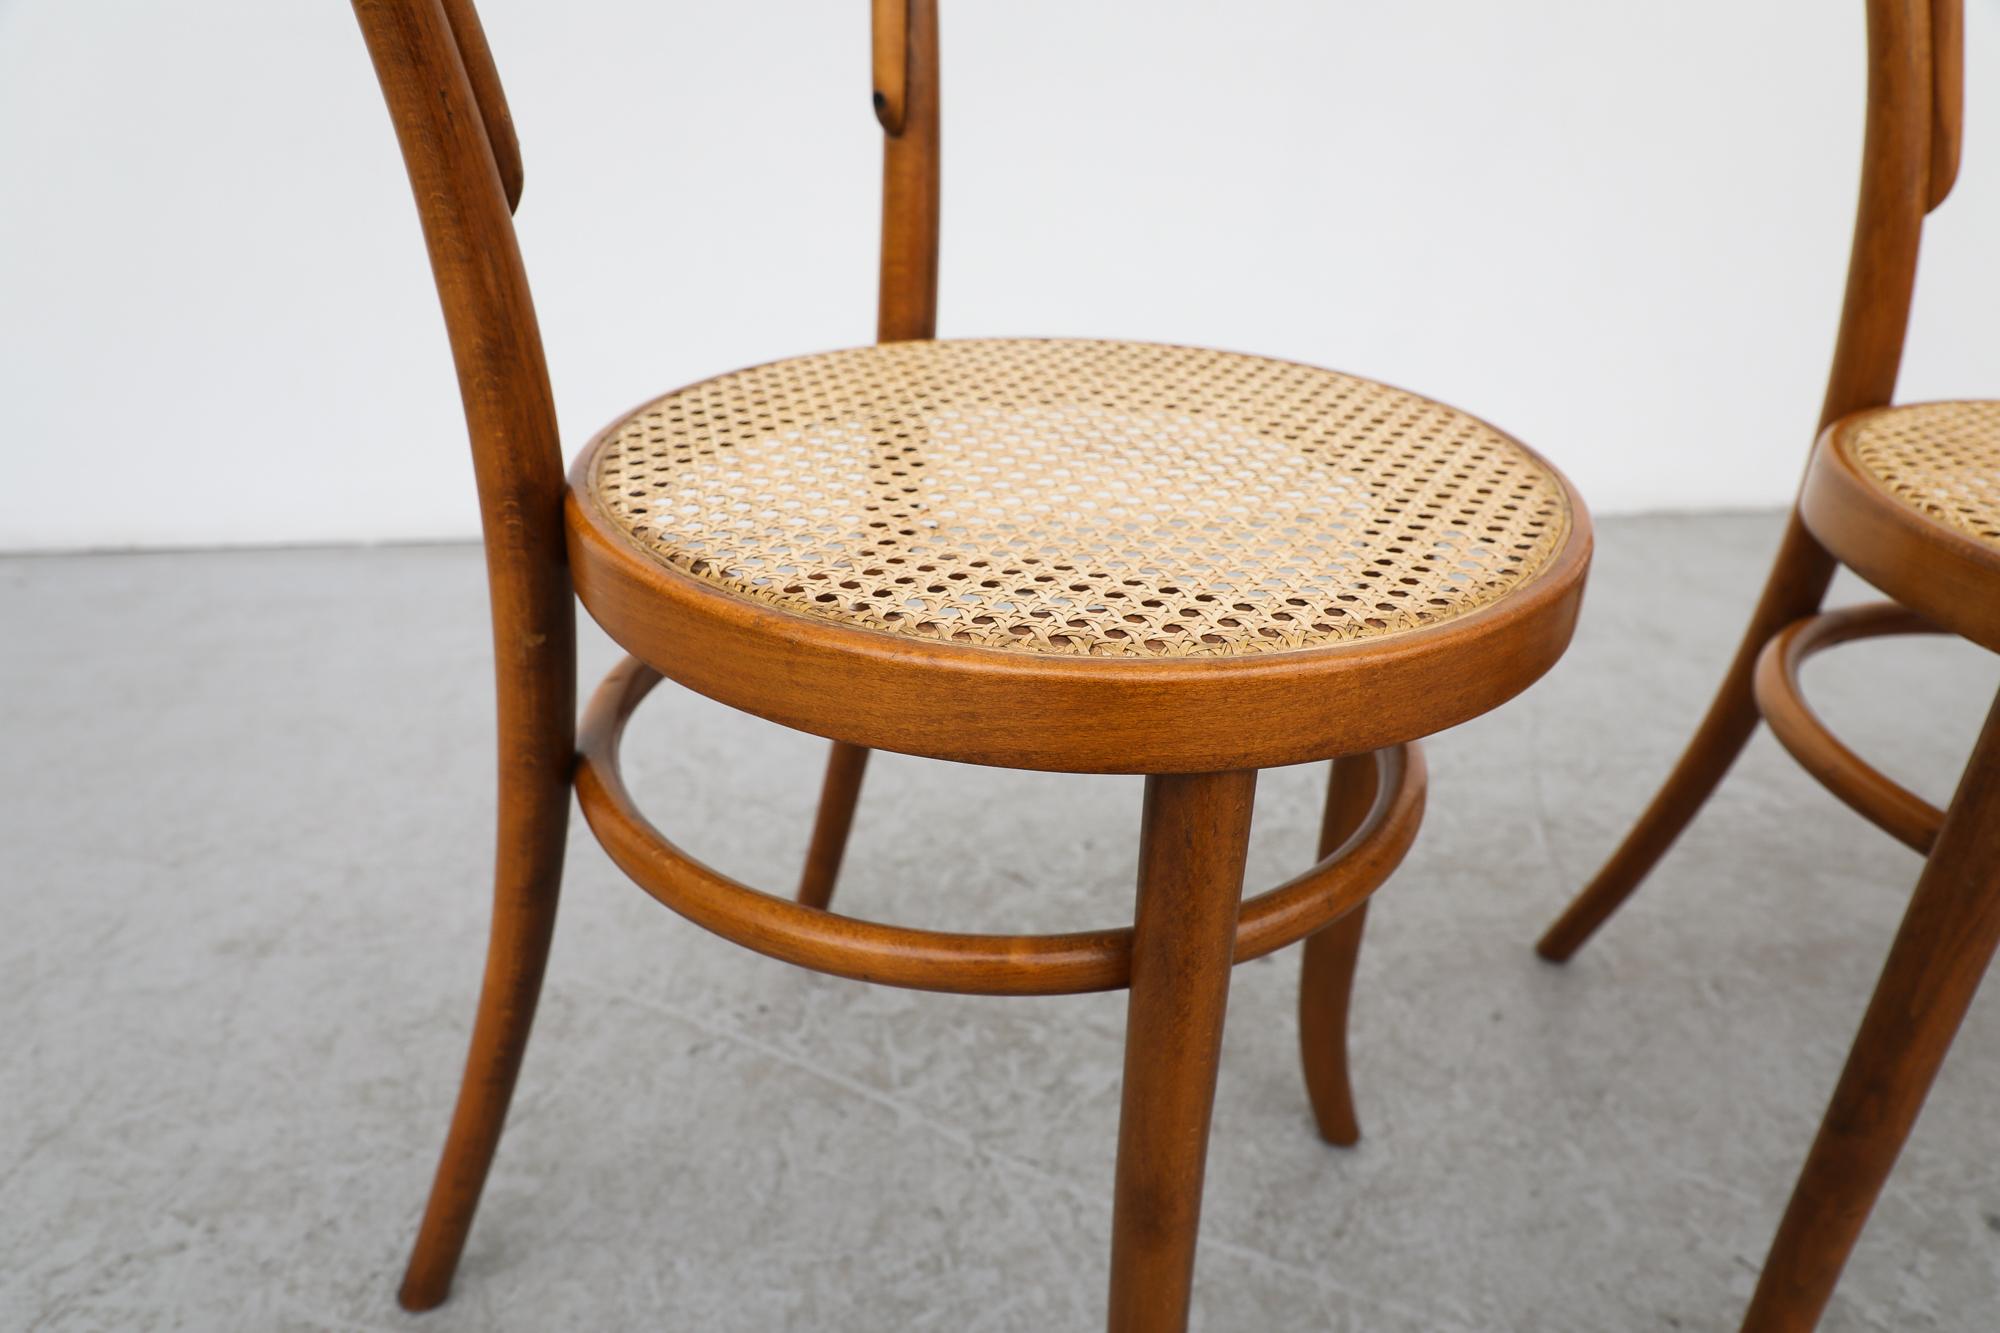 Vintage Thonet No. 14 Bentwood and Cane Café Side Chairs with Cane Seats For Sale 2